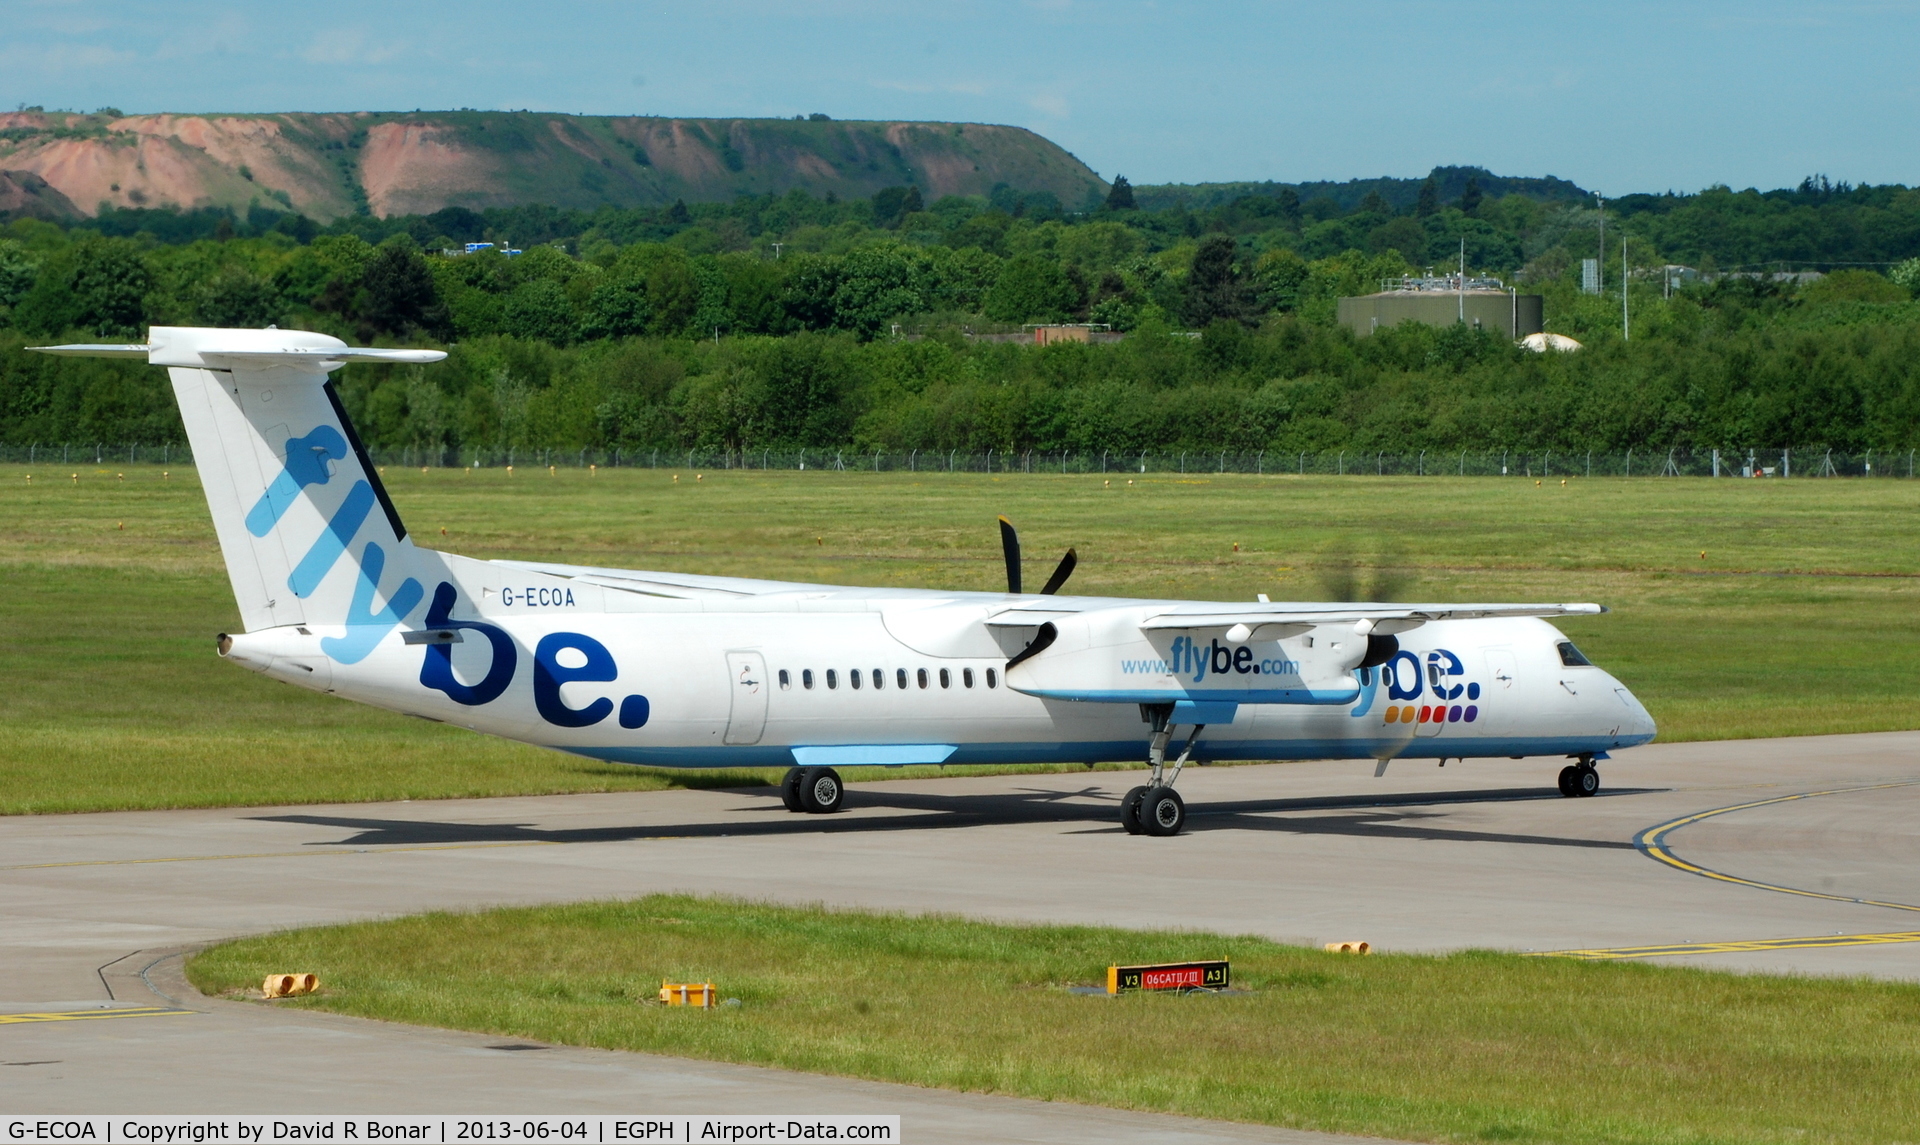 G-ECOA, 2007 De Havilland Canada DHC-8-402Q Dash 8 C/N 4180, Note the use of only one engine during taxi.